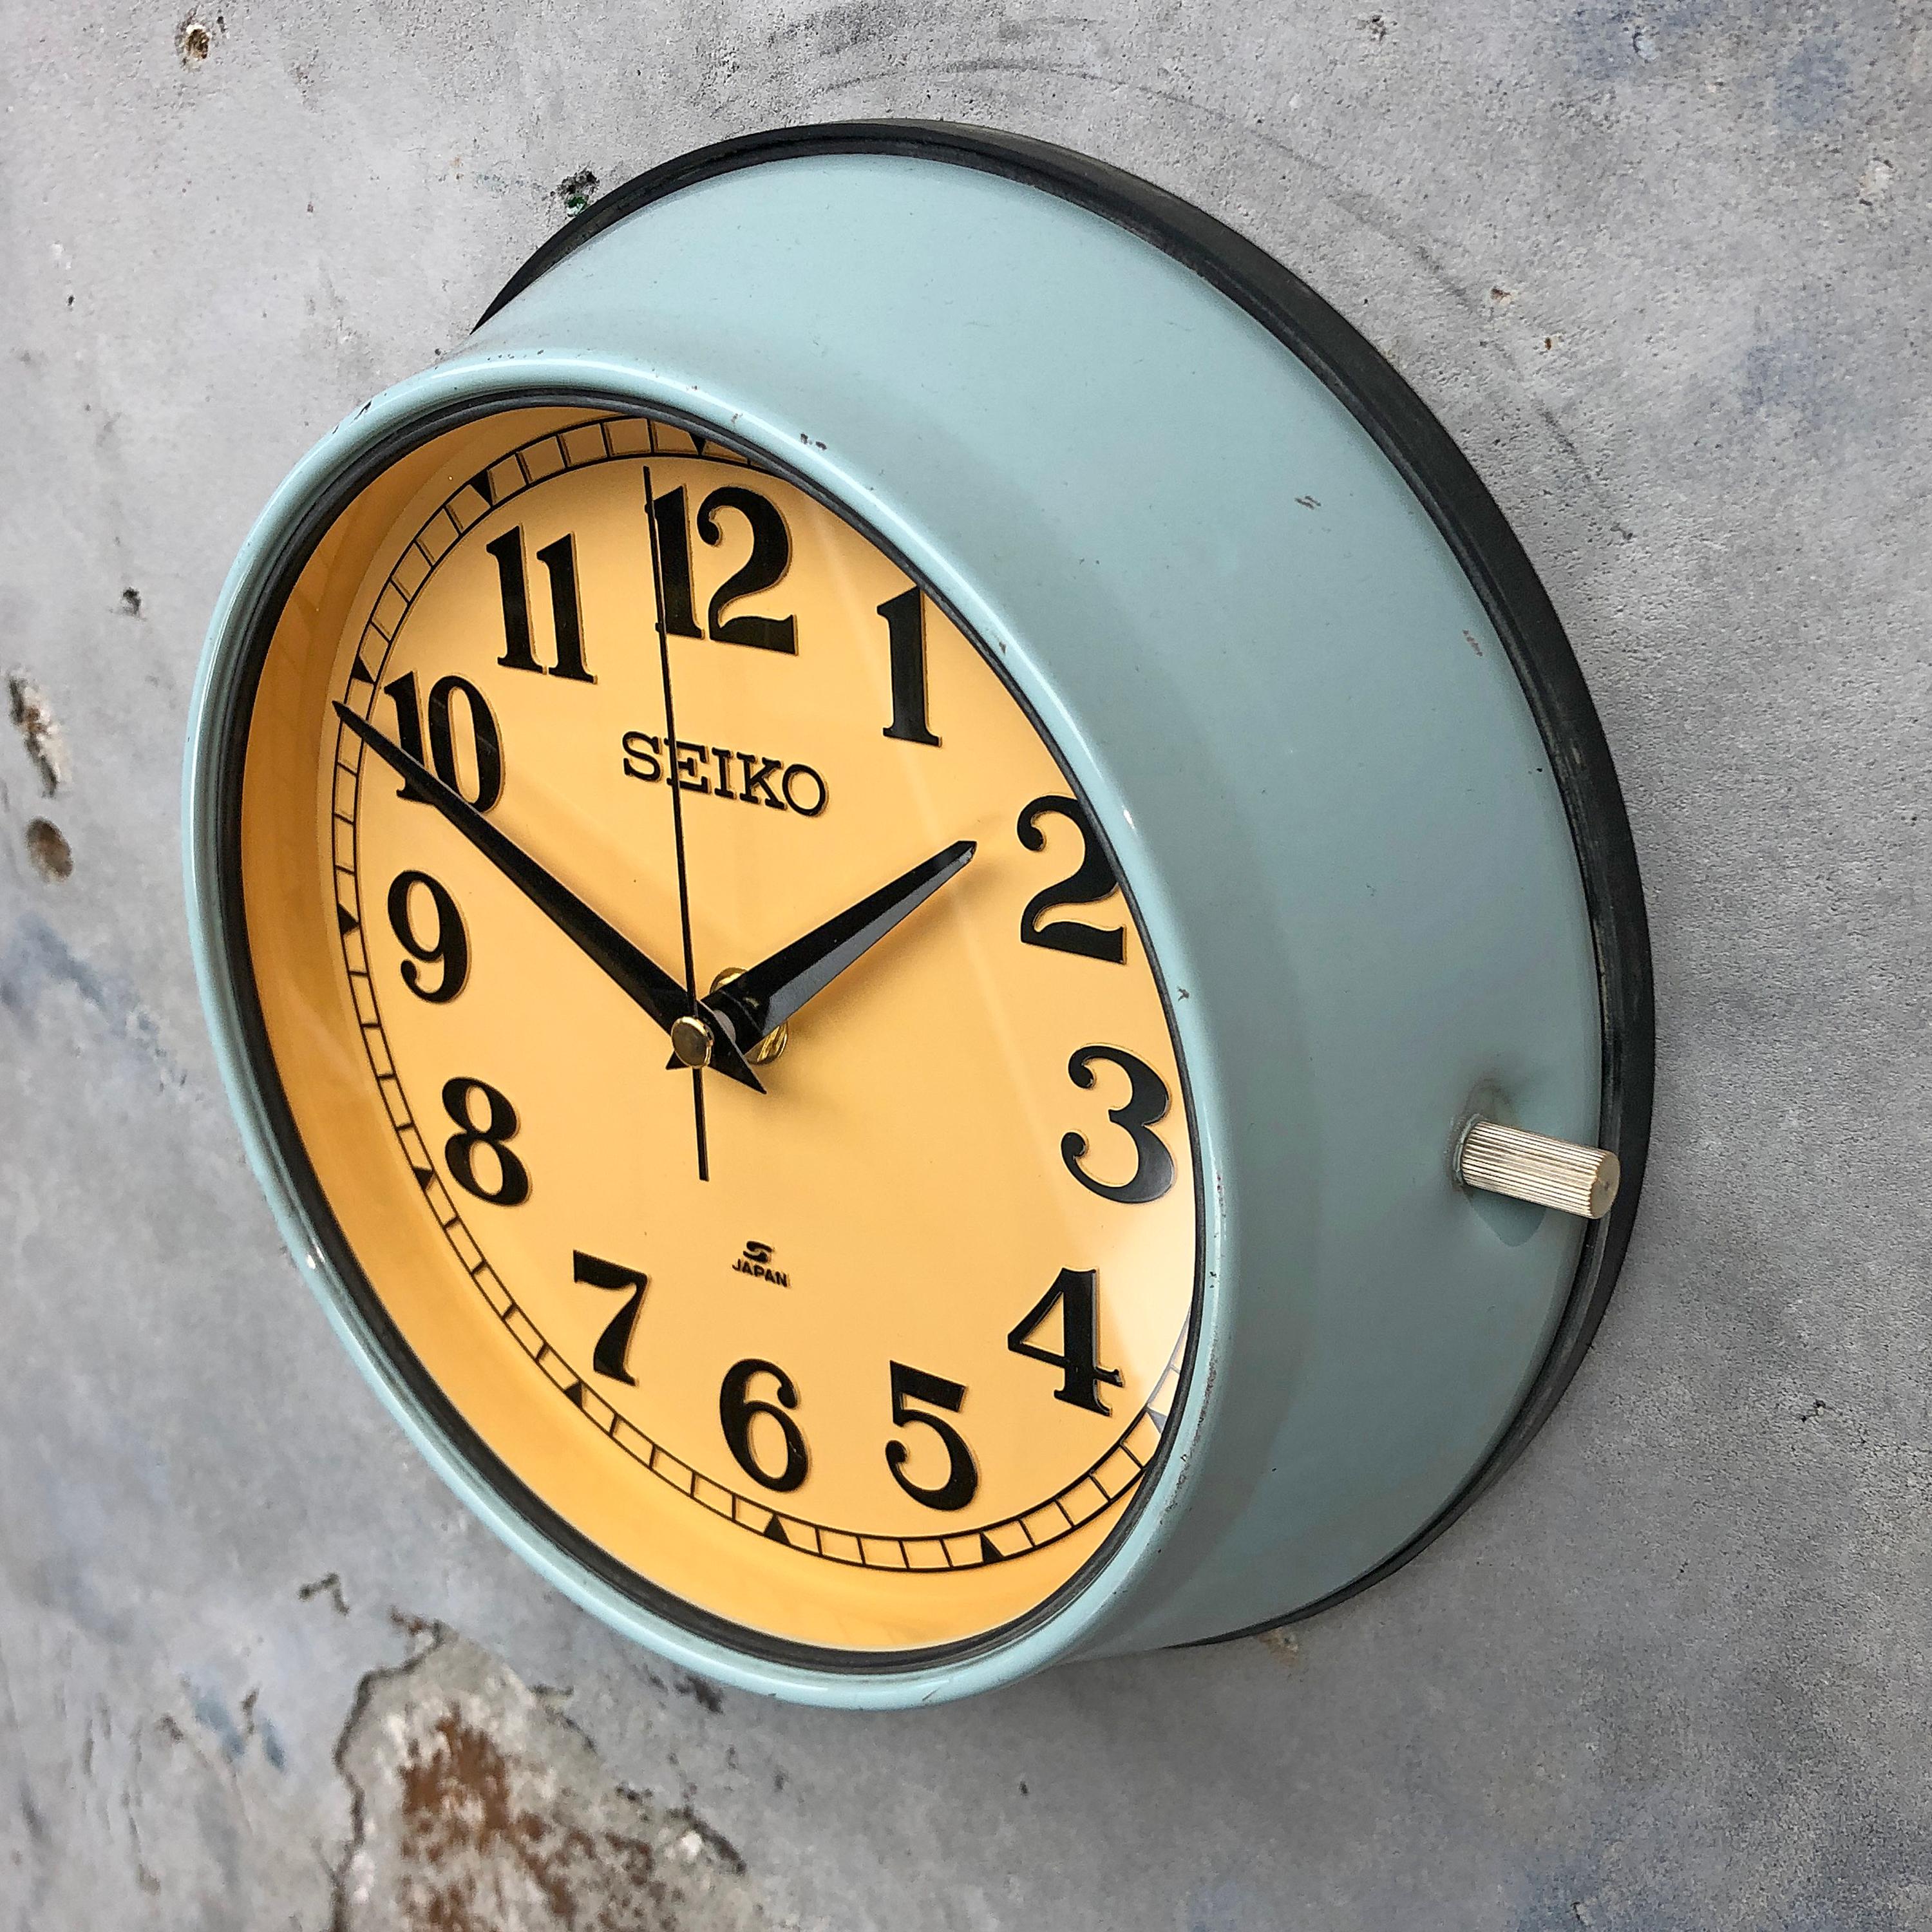 1970 Seiko Blue and Tobacco Retro Vintage Industrial Antique Steel Quartz Clock In Excellent Condition For Sale In Leicester, Leicestershire